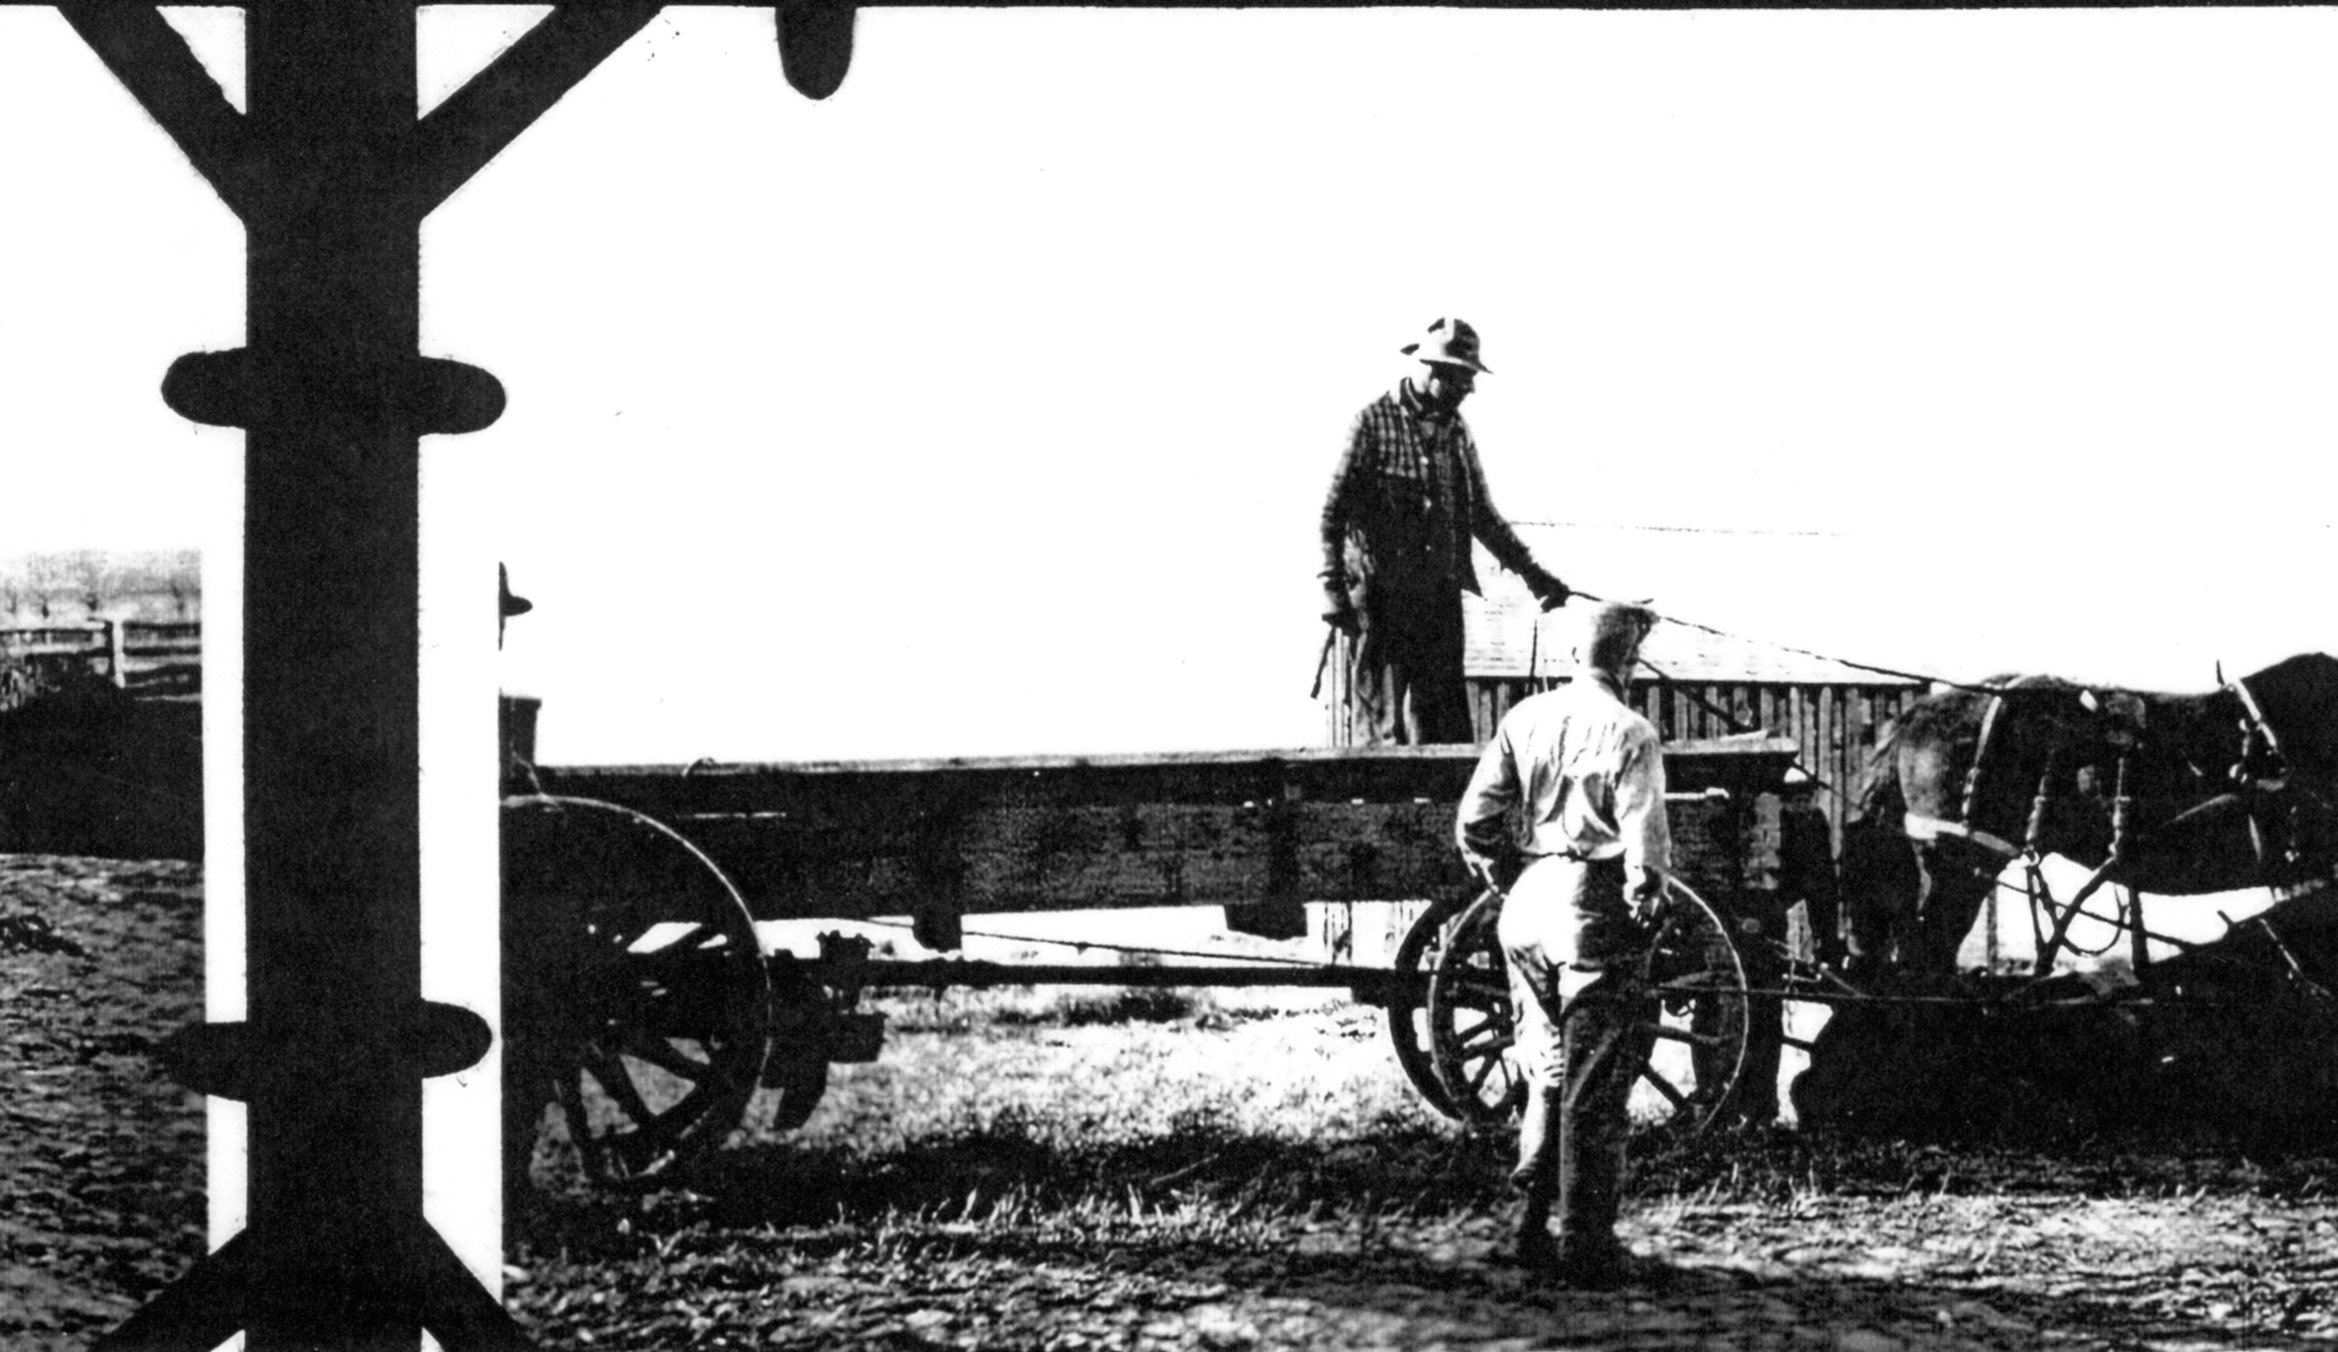 the man stands behind his horse drawn wagon